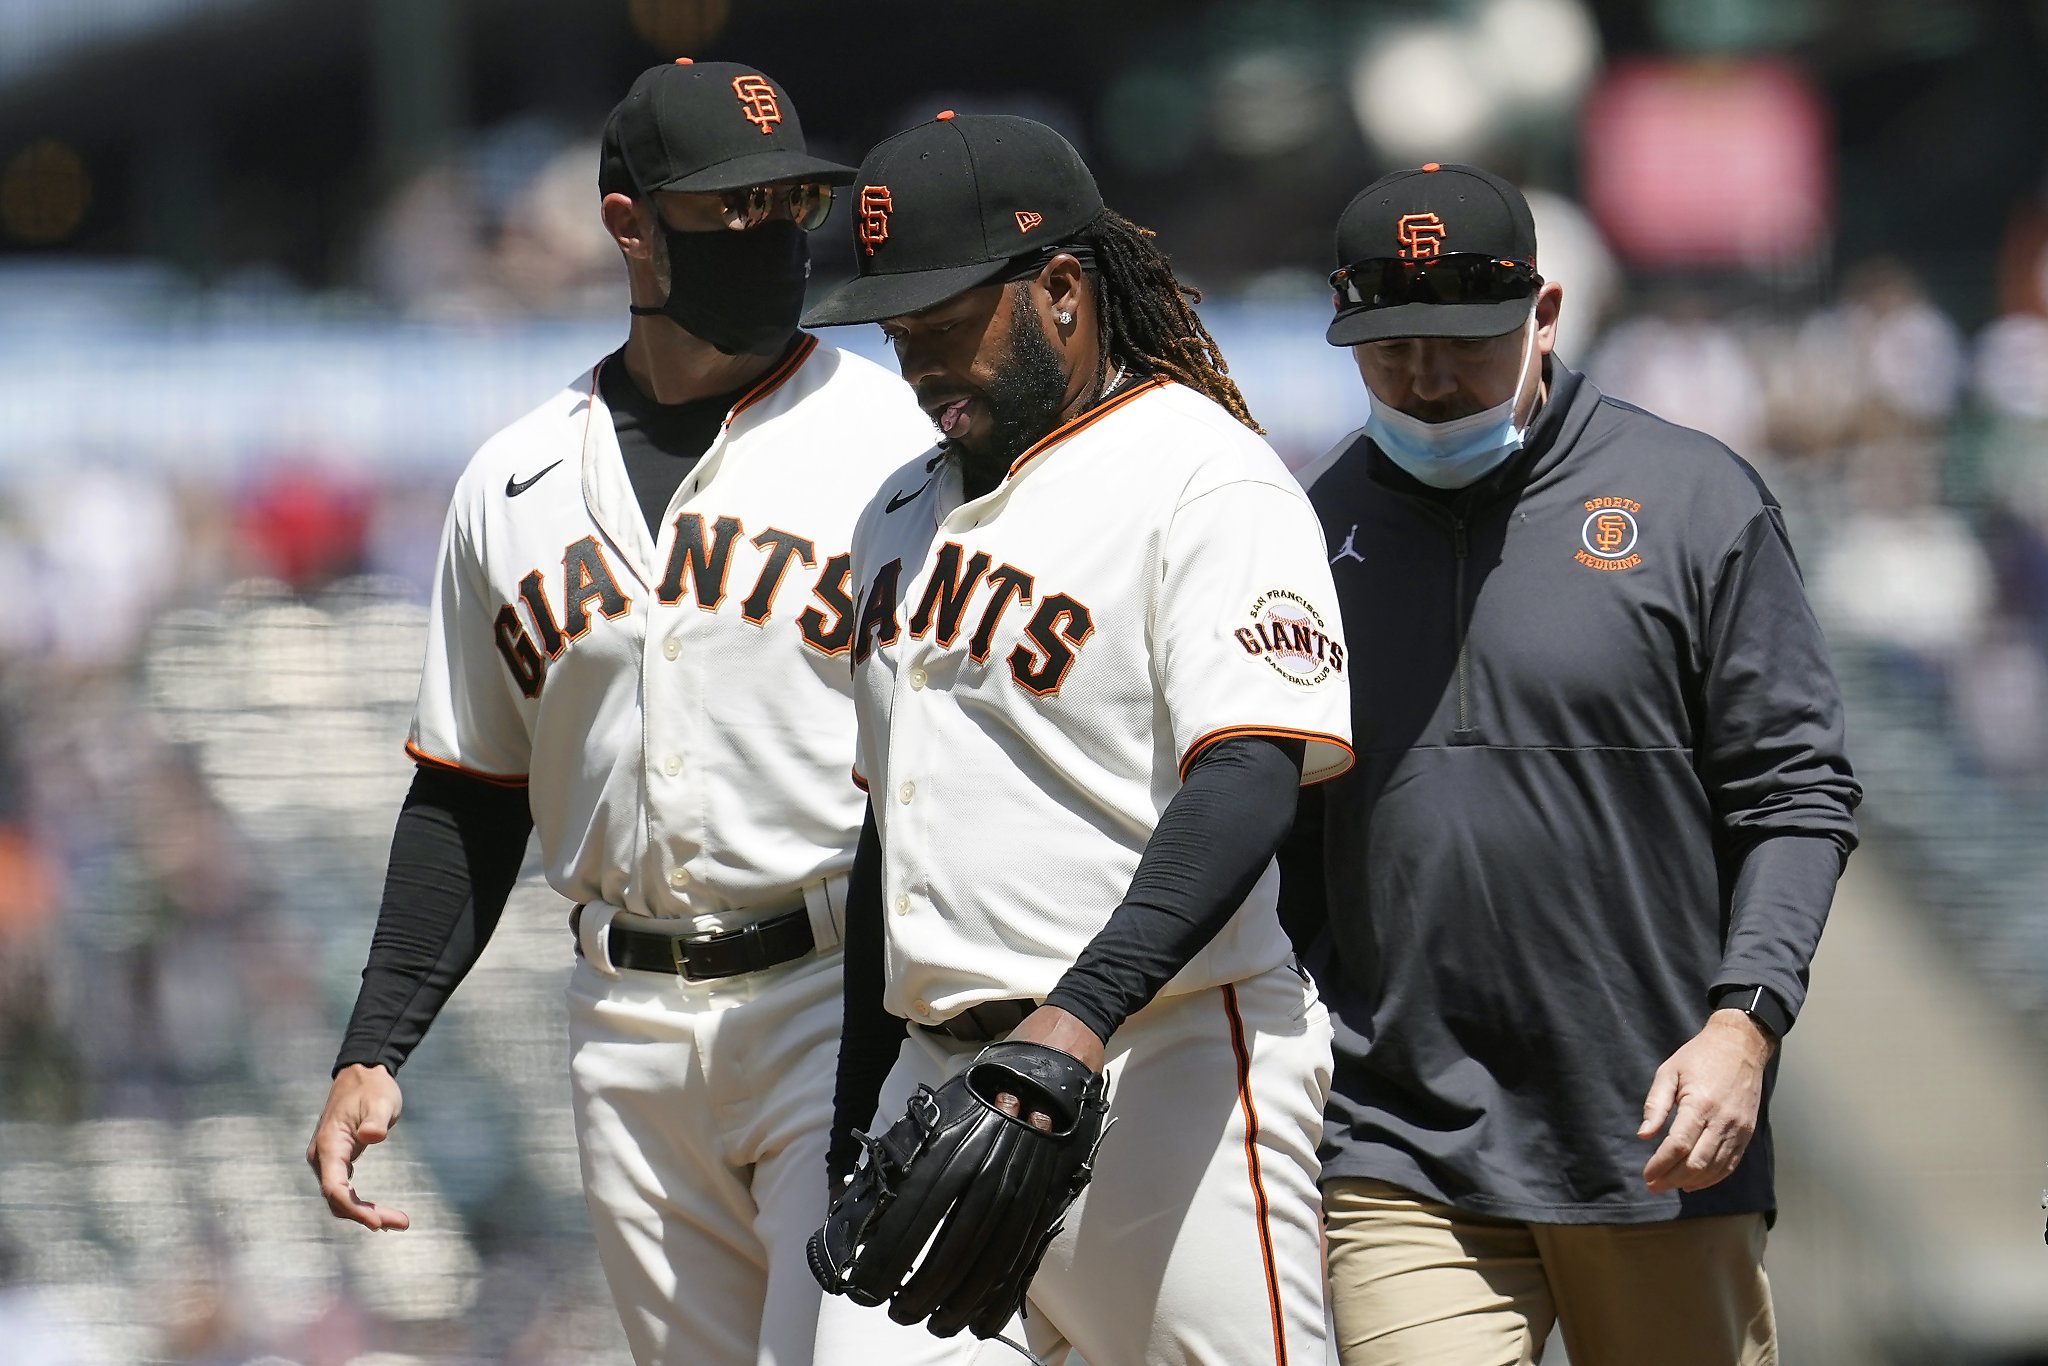 Report: Johnny Cueto headed to disabled list with strained lat 